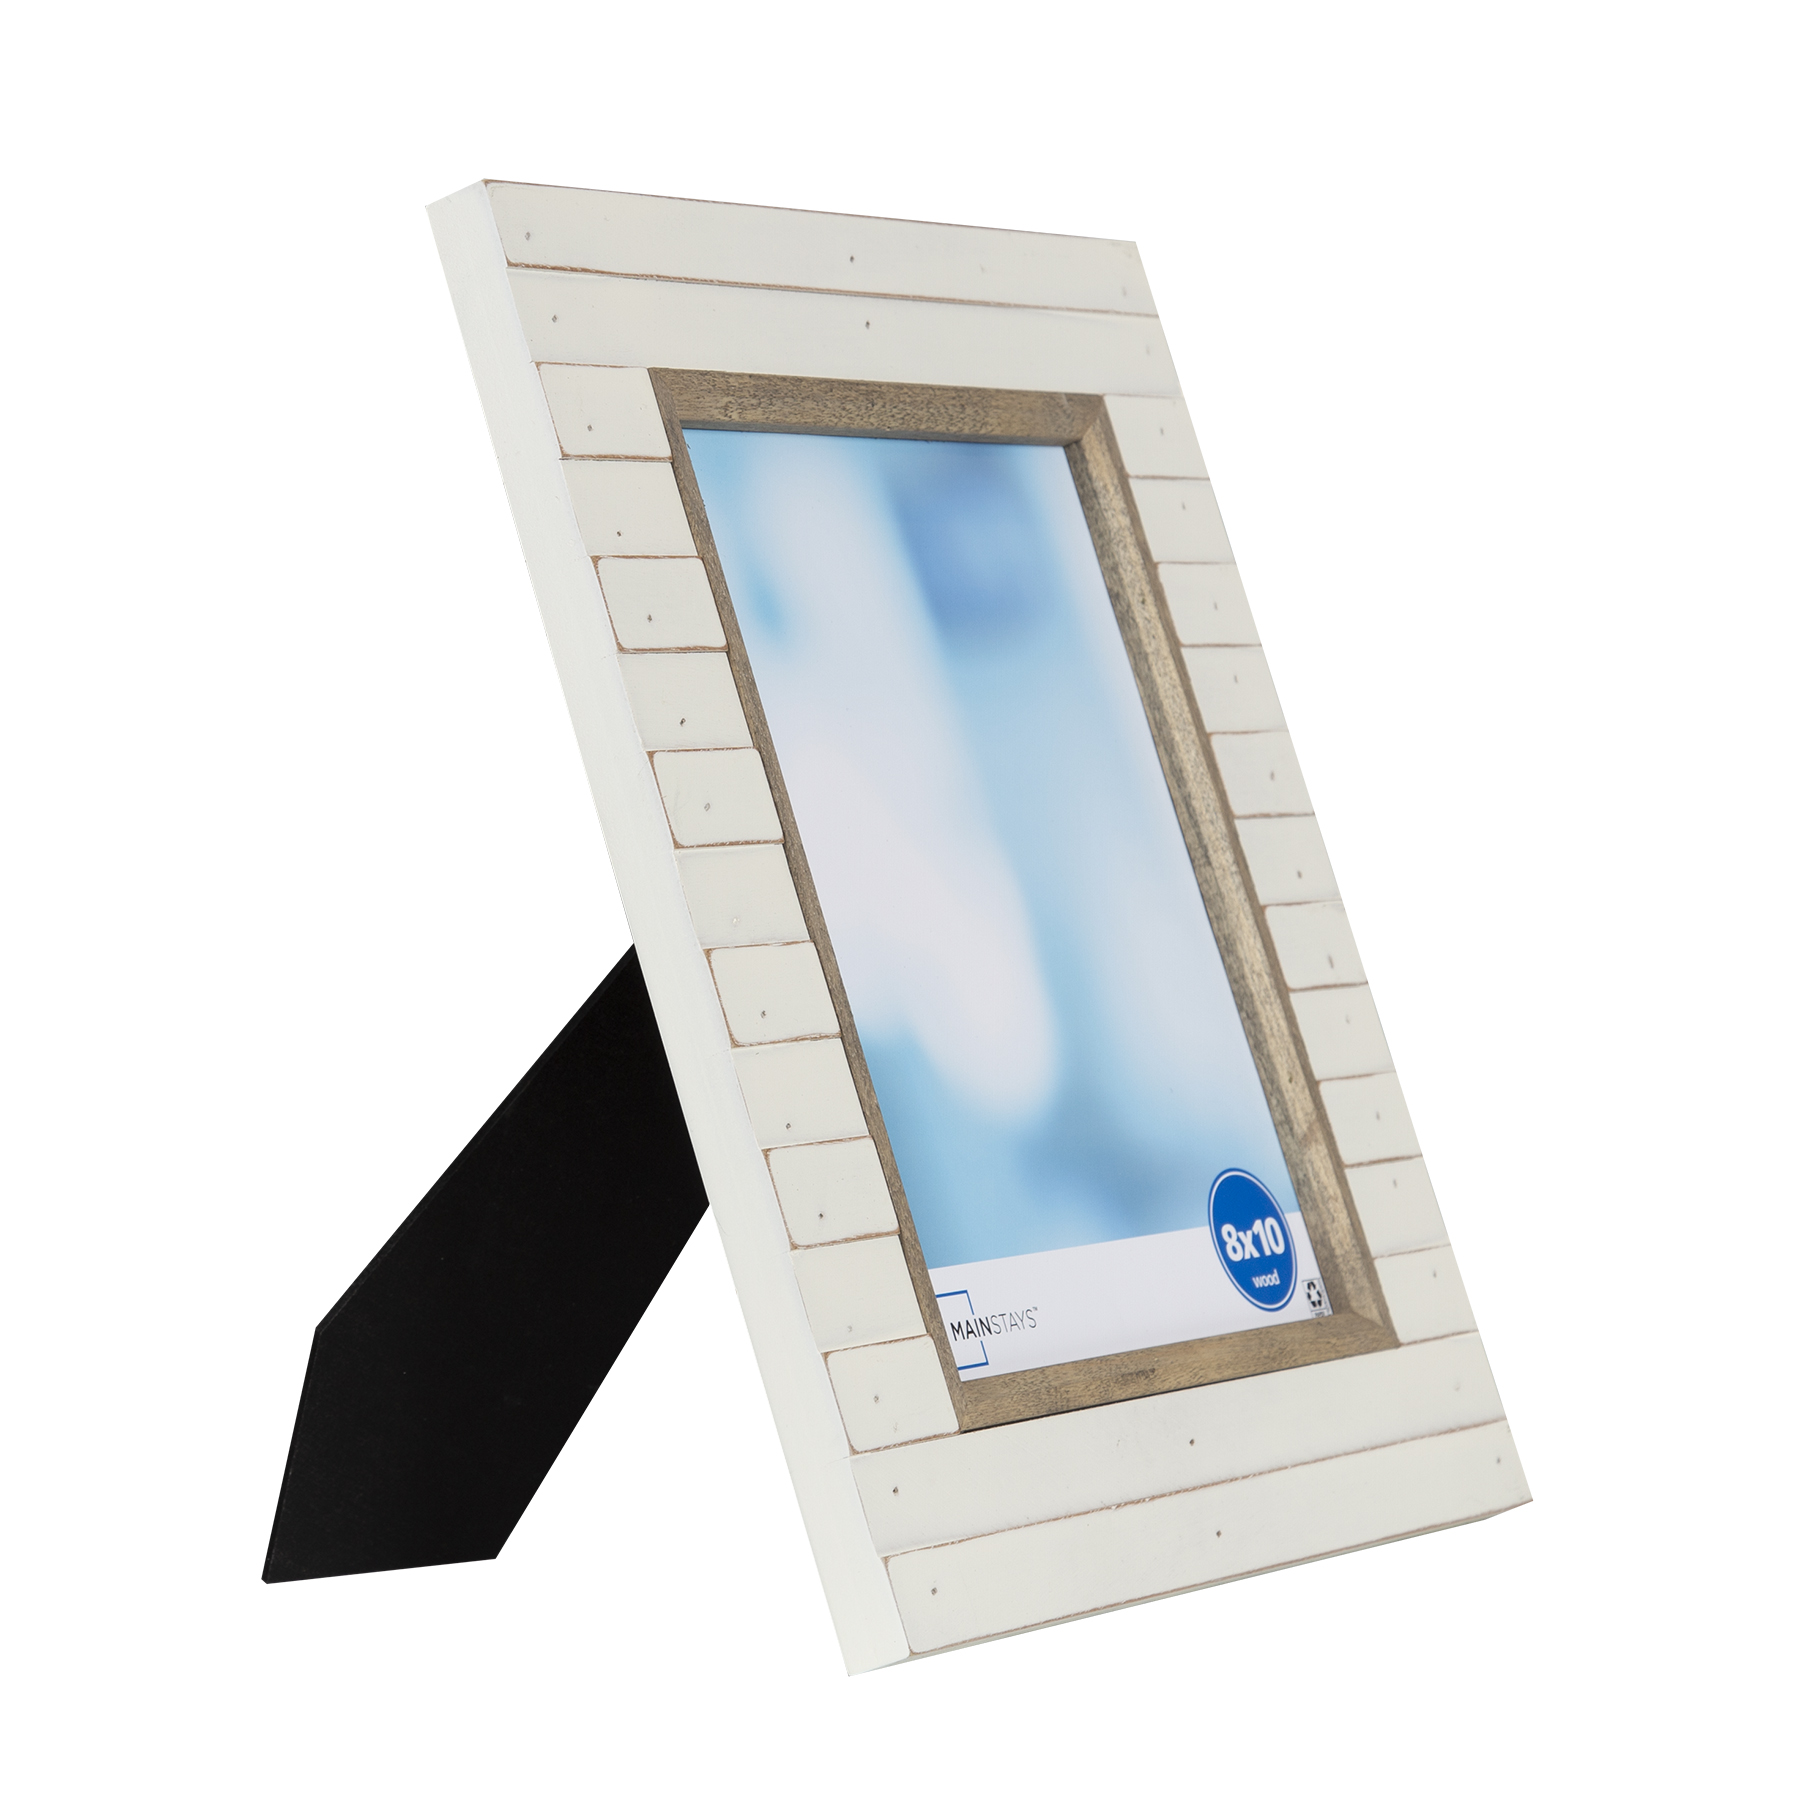 Mainstays Oracoke 8x10 Cream Decorative Wall Picture Frame - image 4 of 6